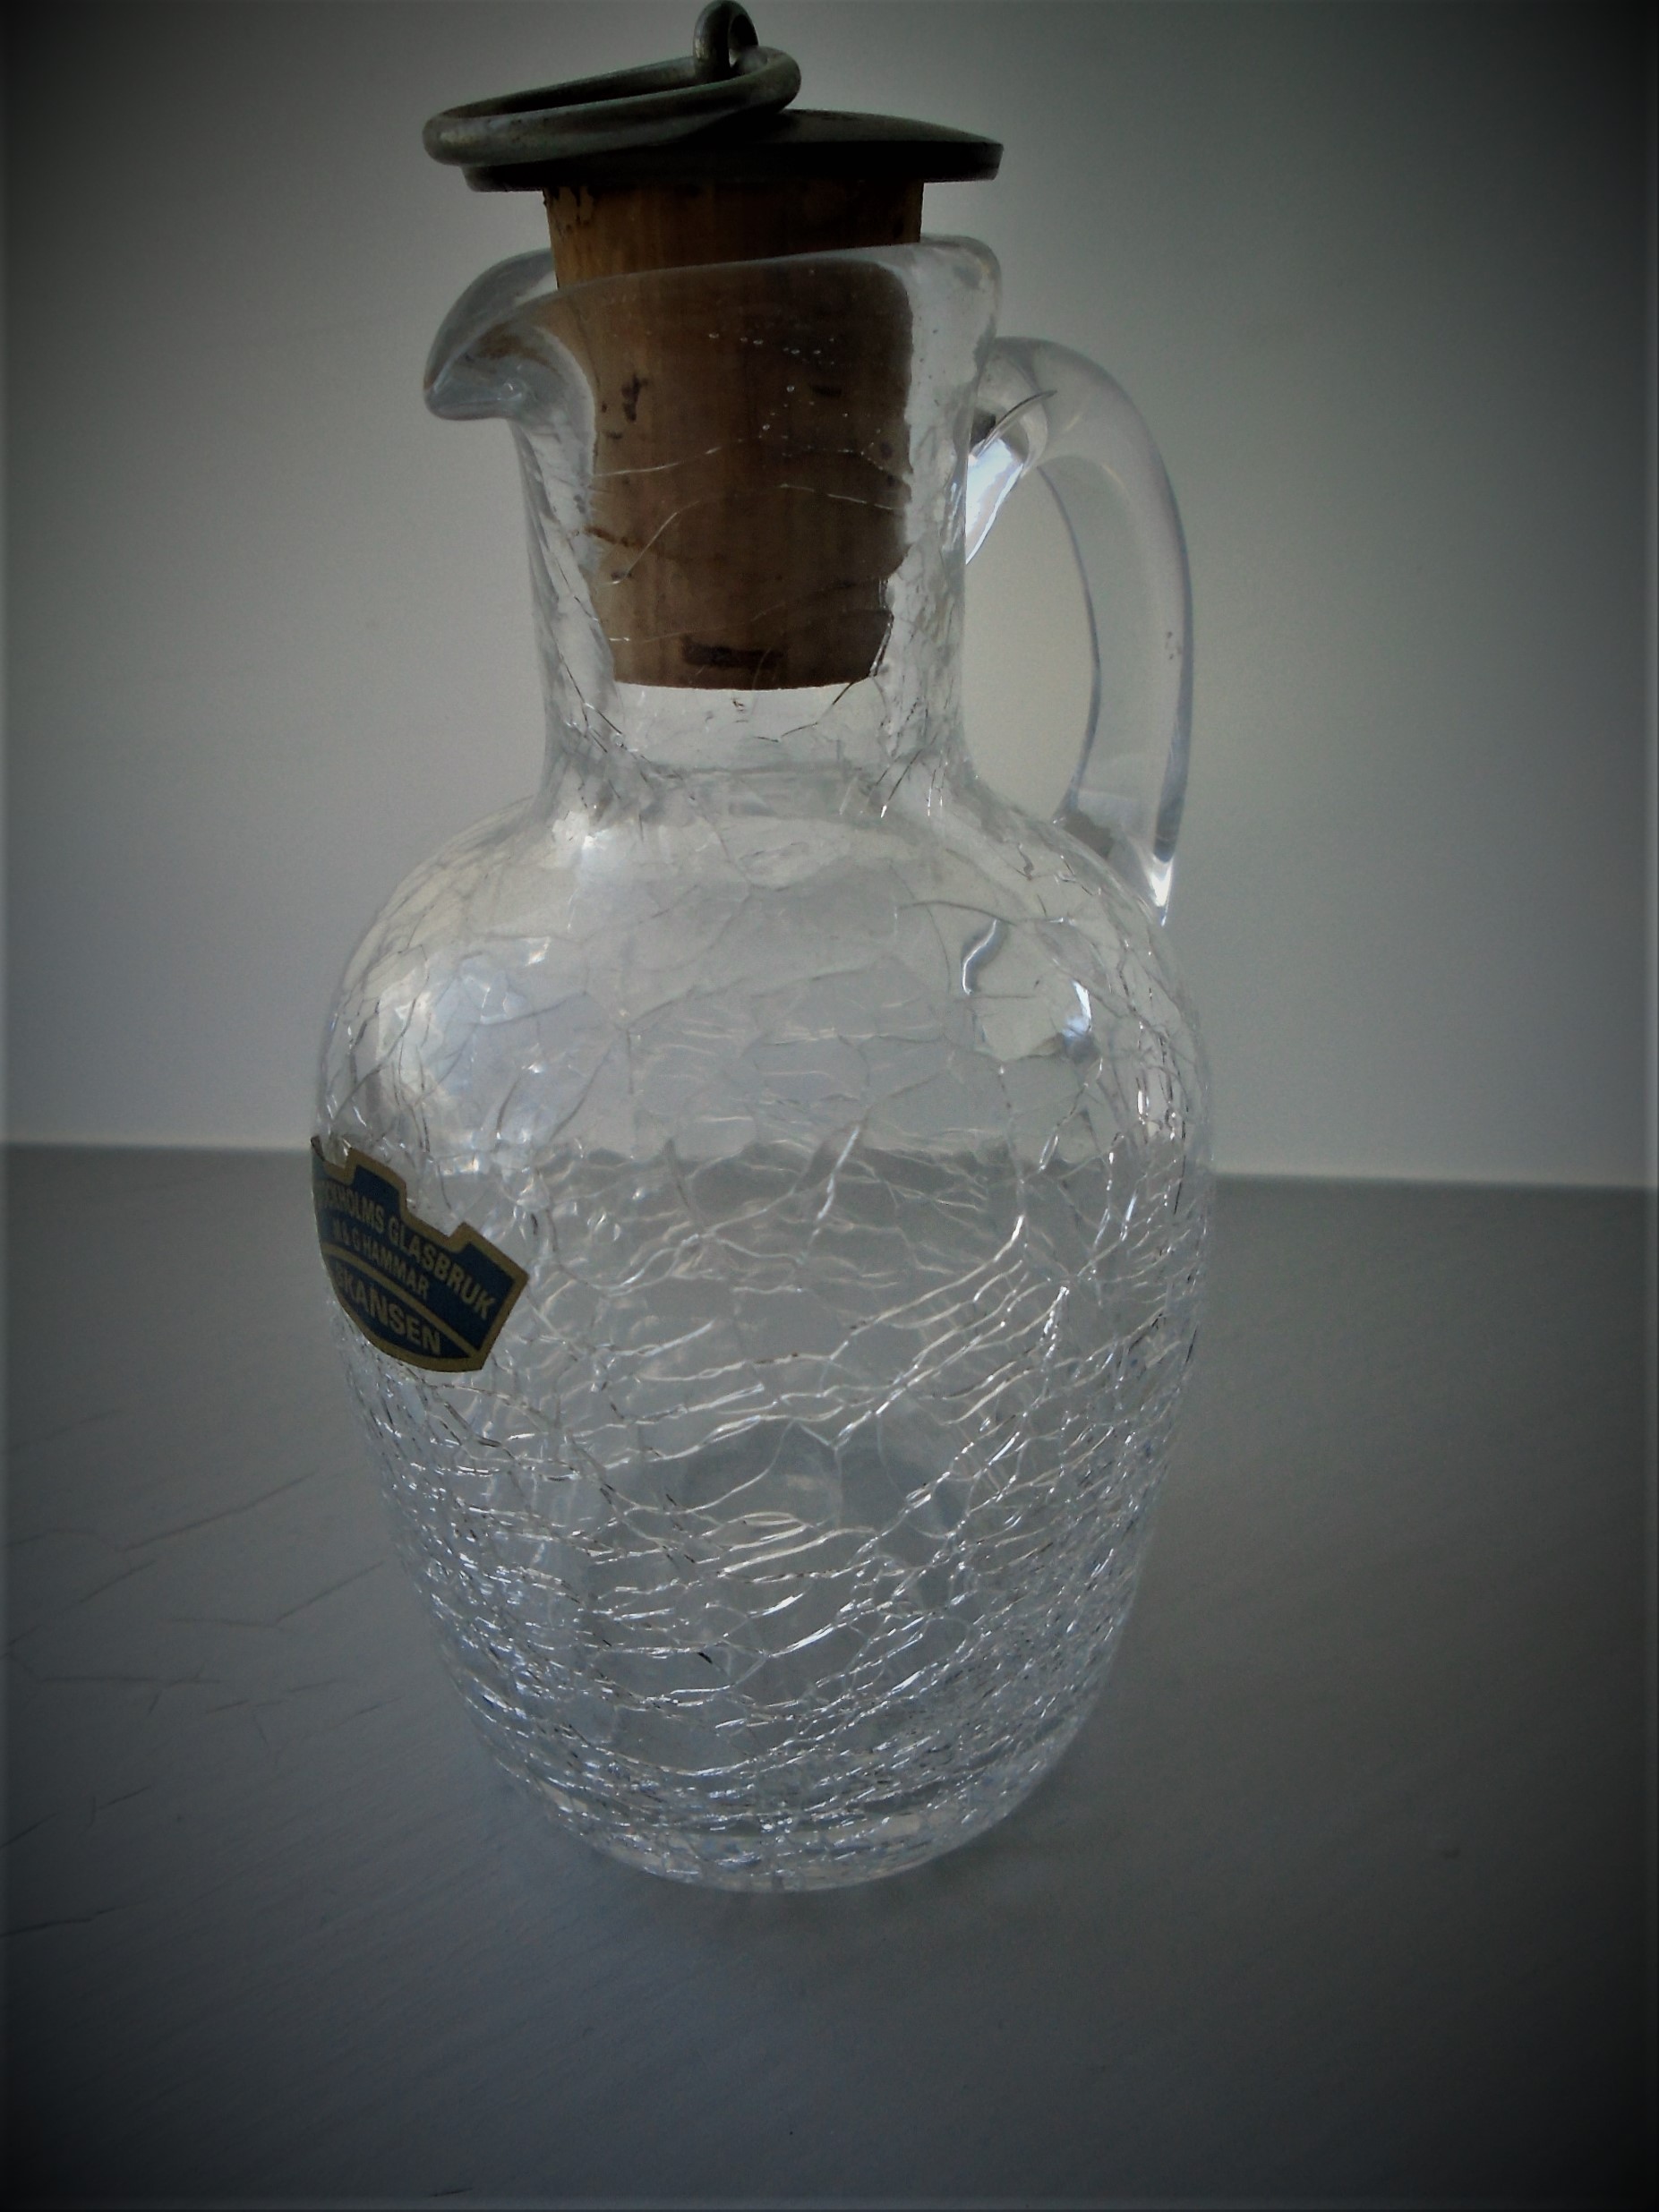 Offered for sale is STYLISH PIECE OF VINTAGE SWEDISH TABLEWARE IN THE FORM OF THIS CLEAR CRACKLE GLASS  JUG/PITCHER  with cork and embossed stopper.